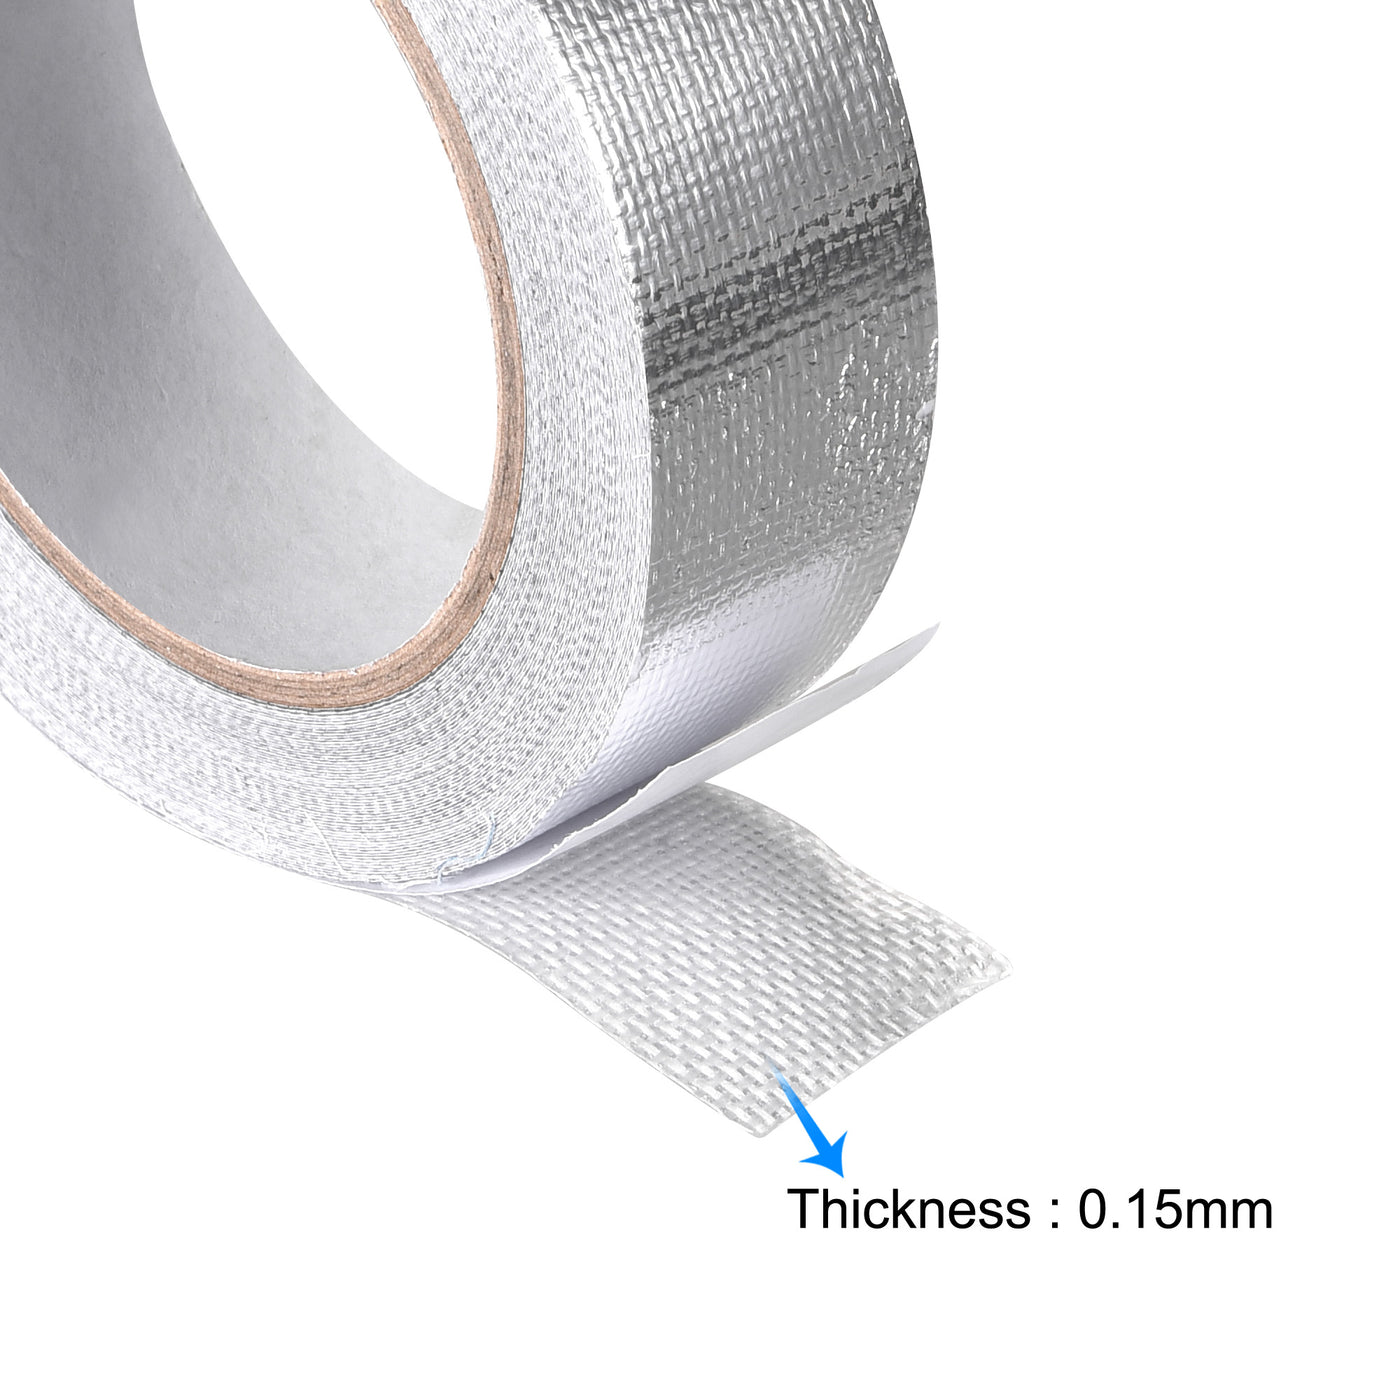 uxcell Uxcell Aluminum Foil Tape High-Temperature Tape for HVAC,Sealing 50mmx20m/65ft